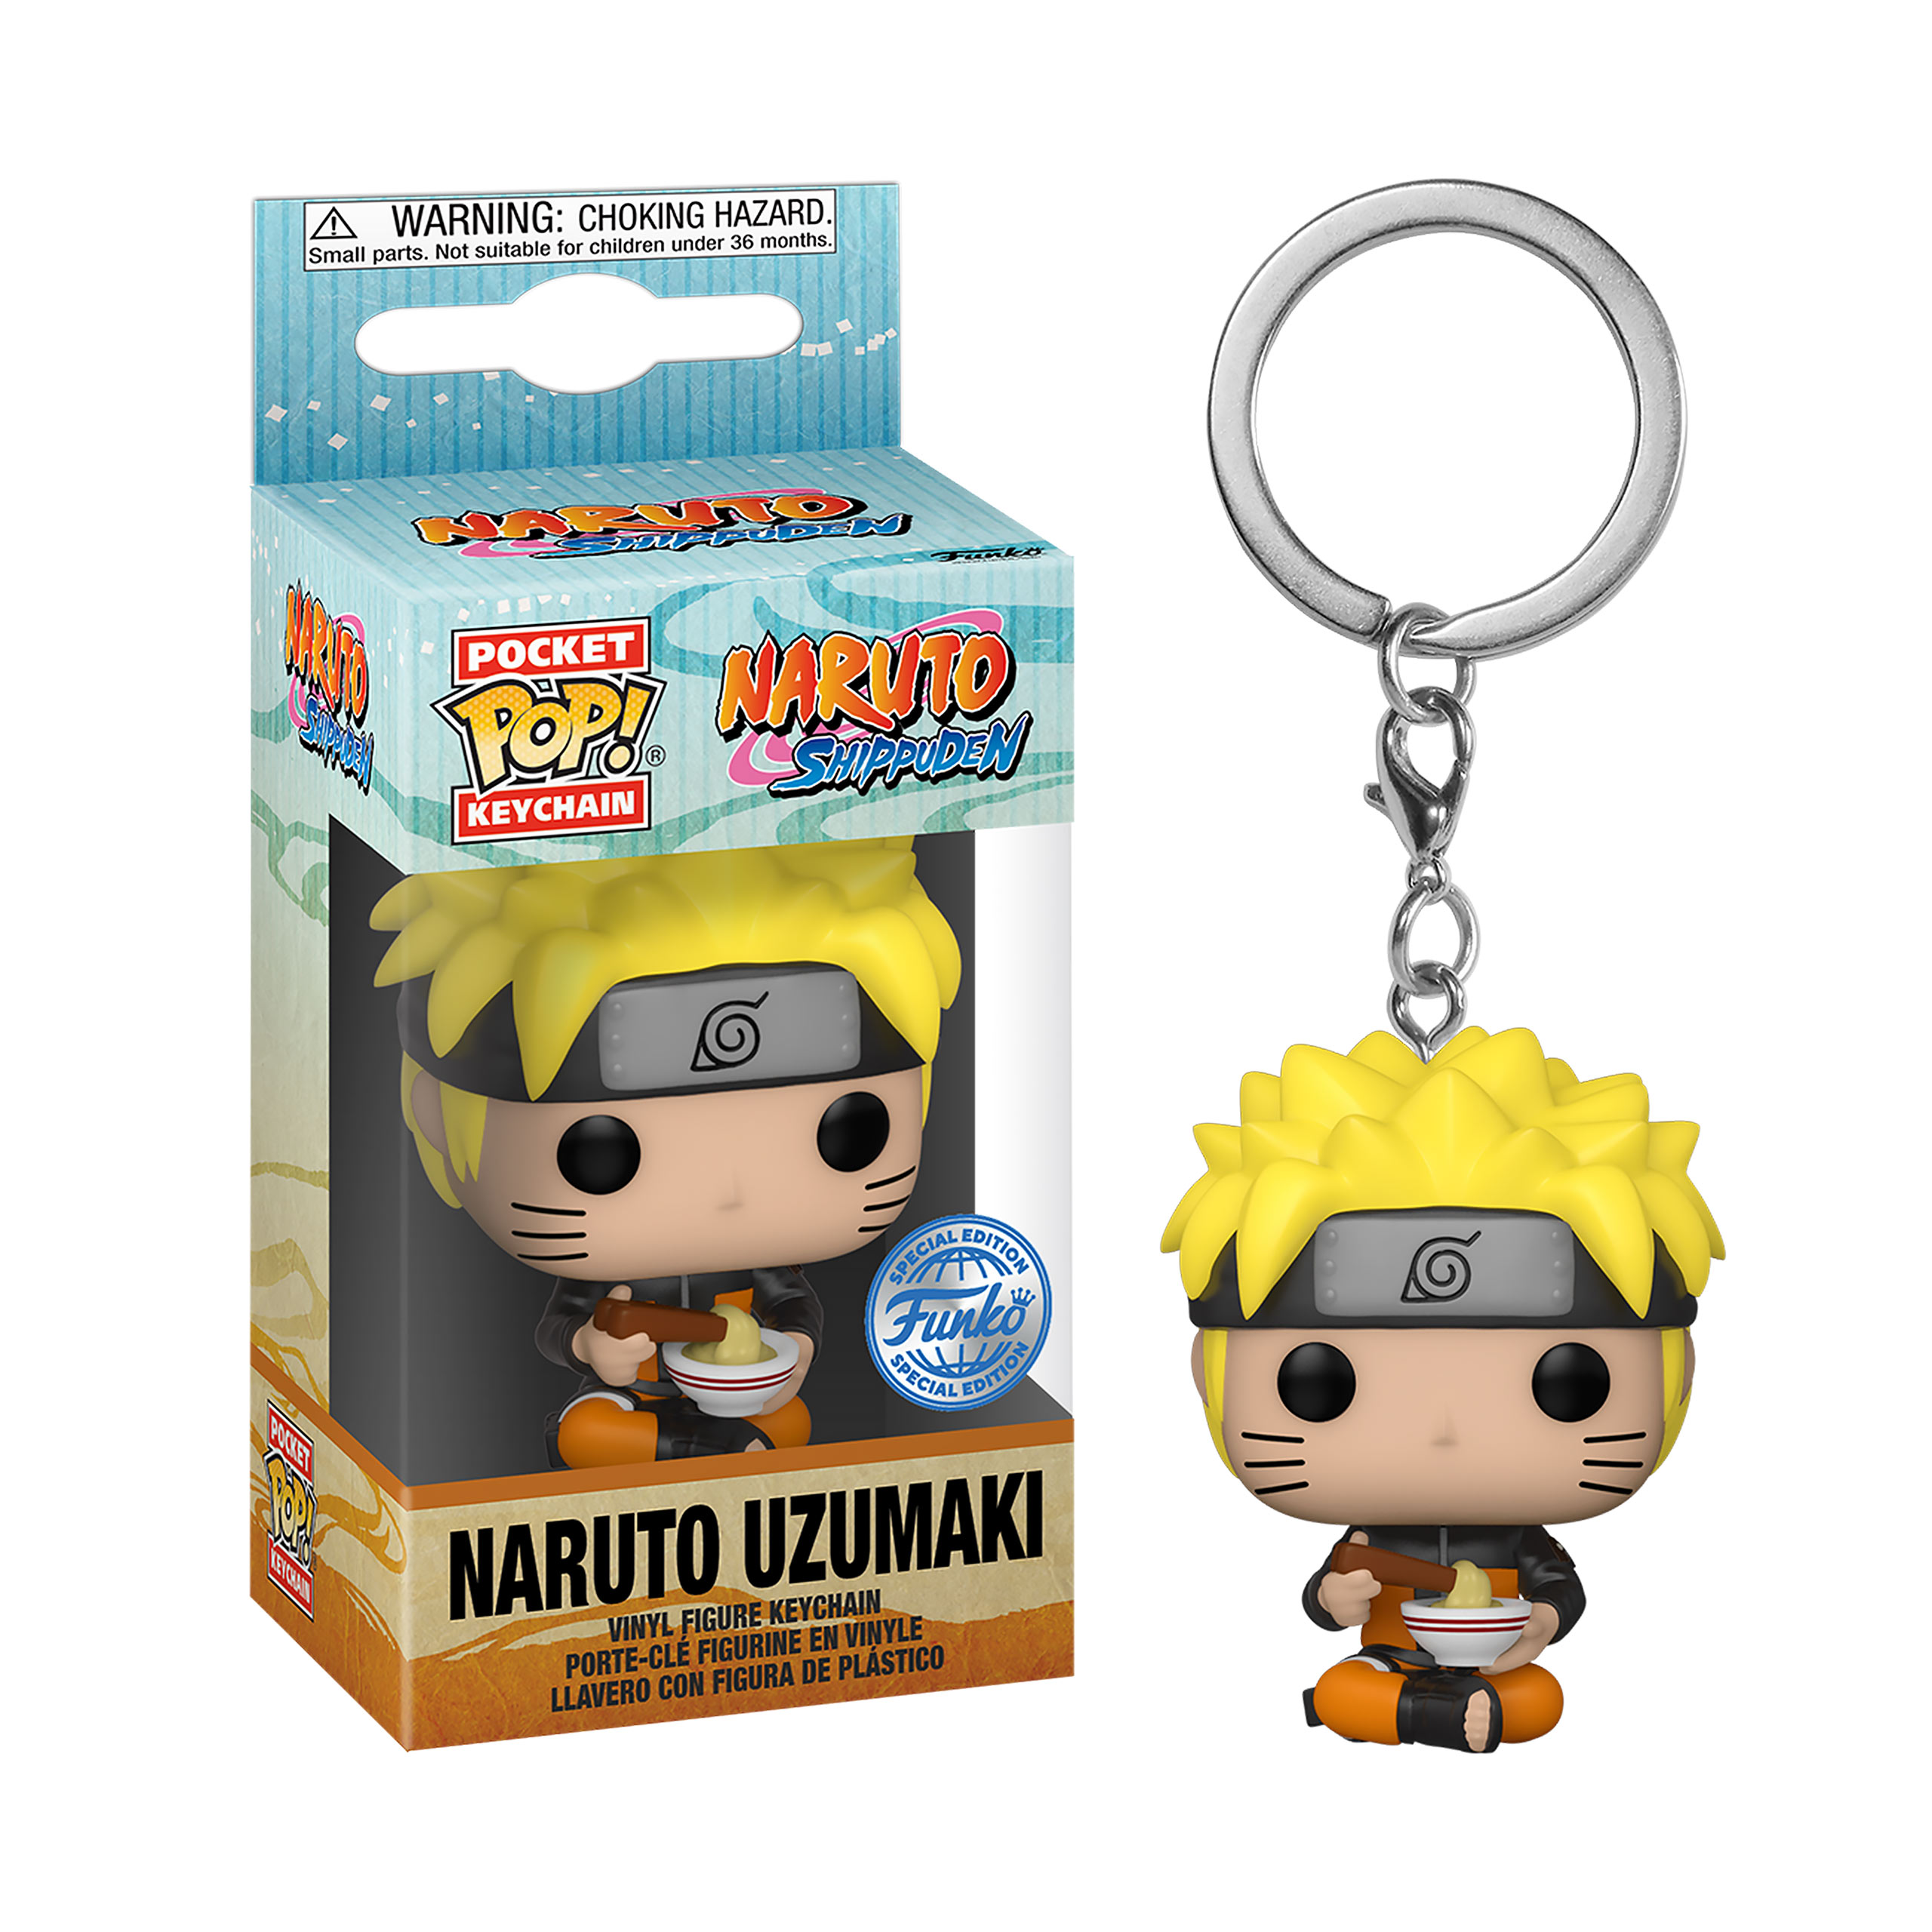 Naruto Shippuden with Noodles Funko Pop Keychain